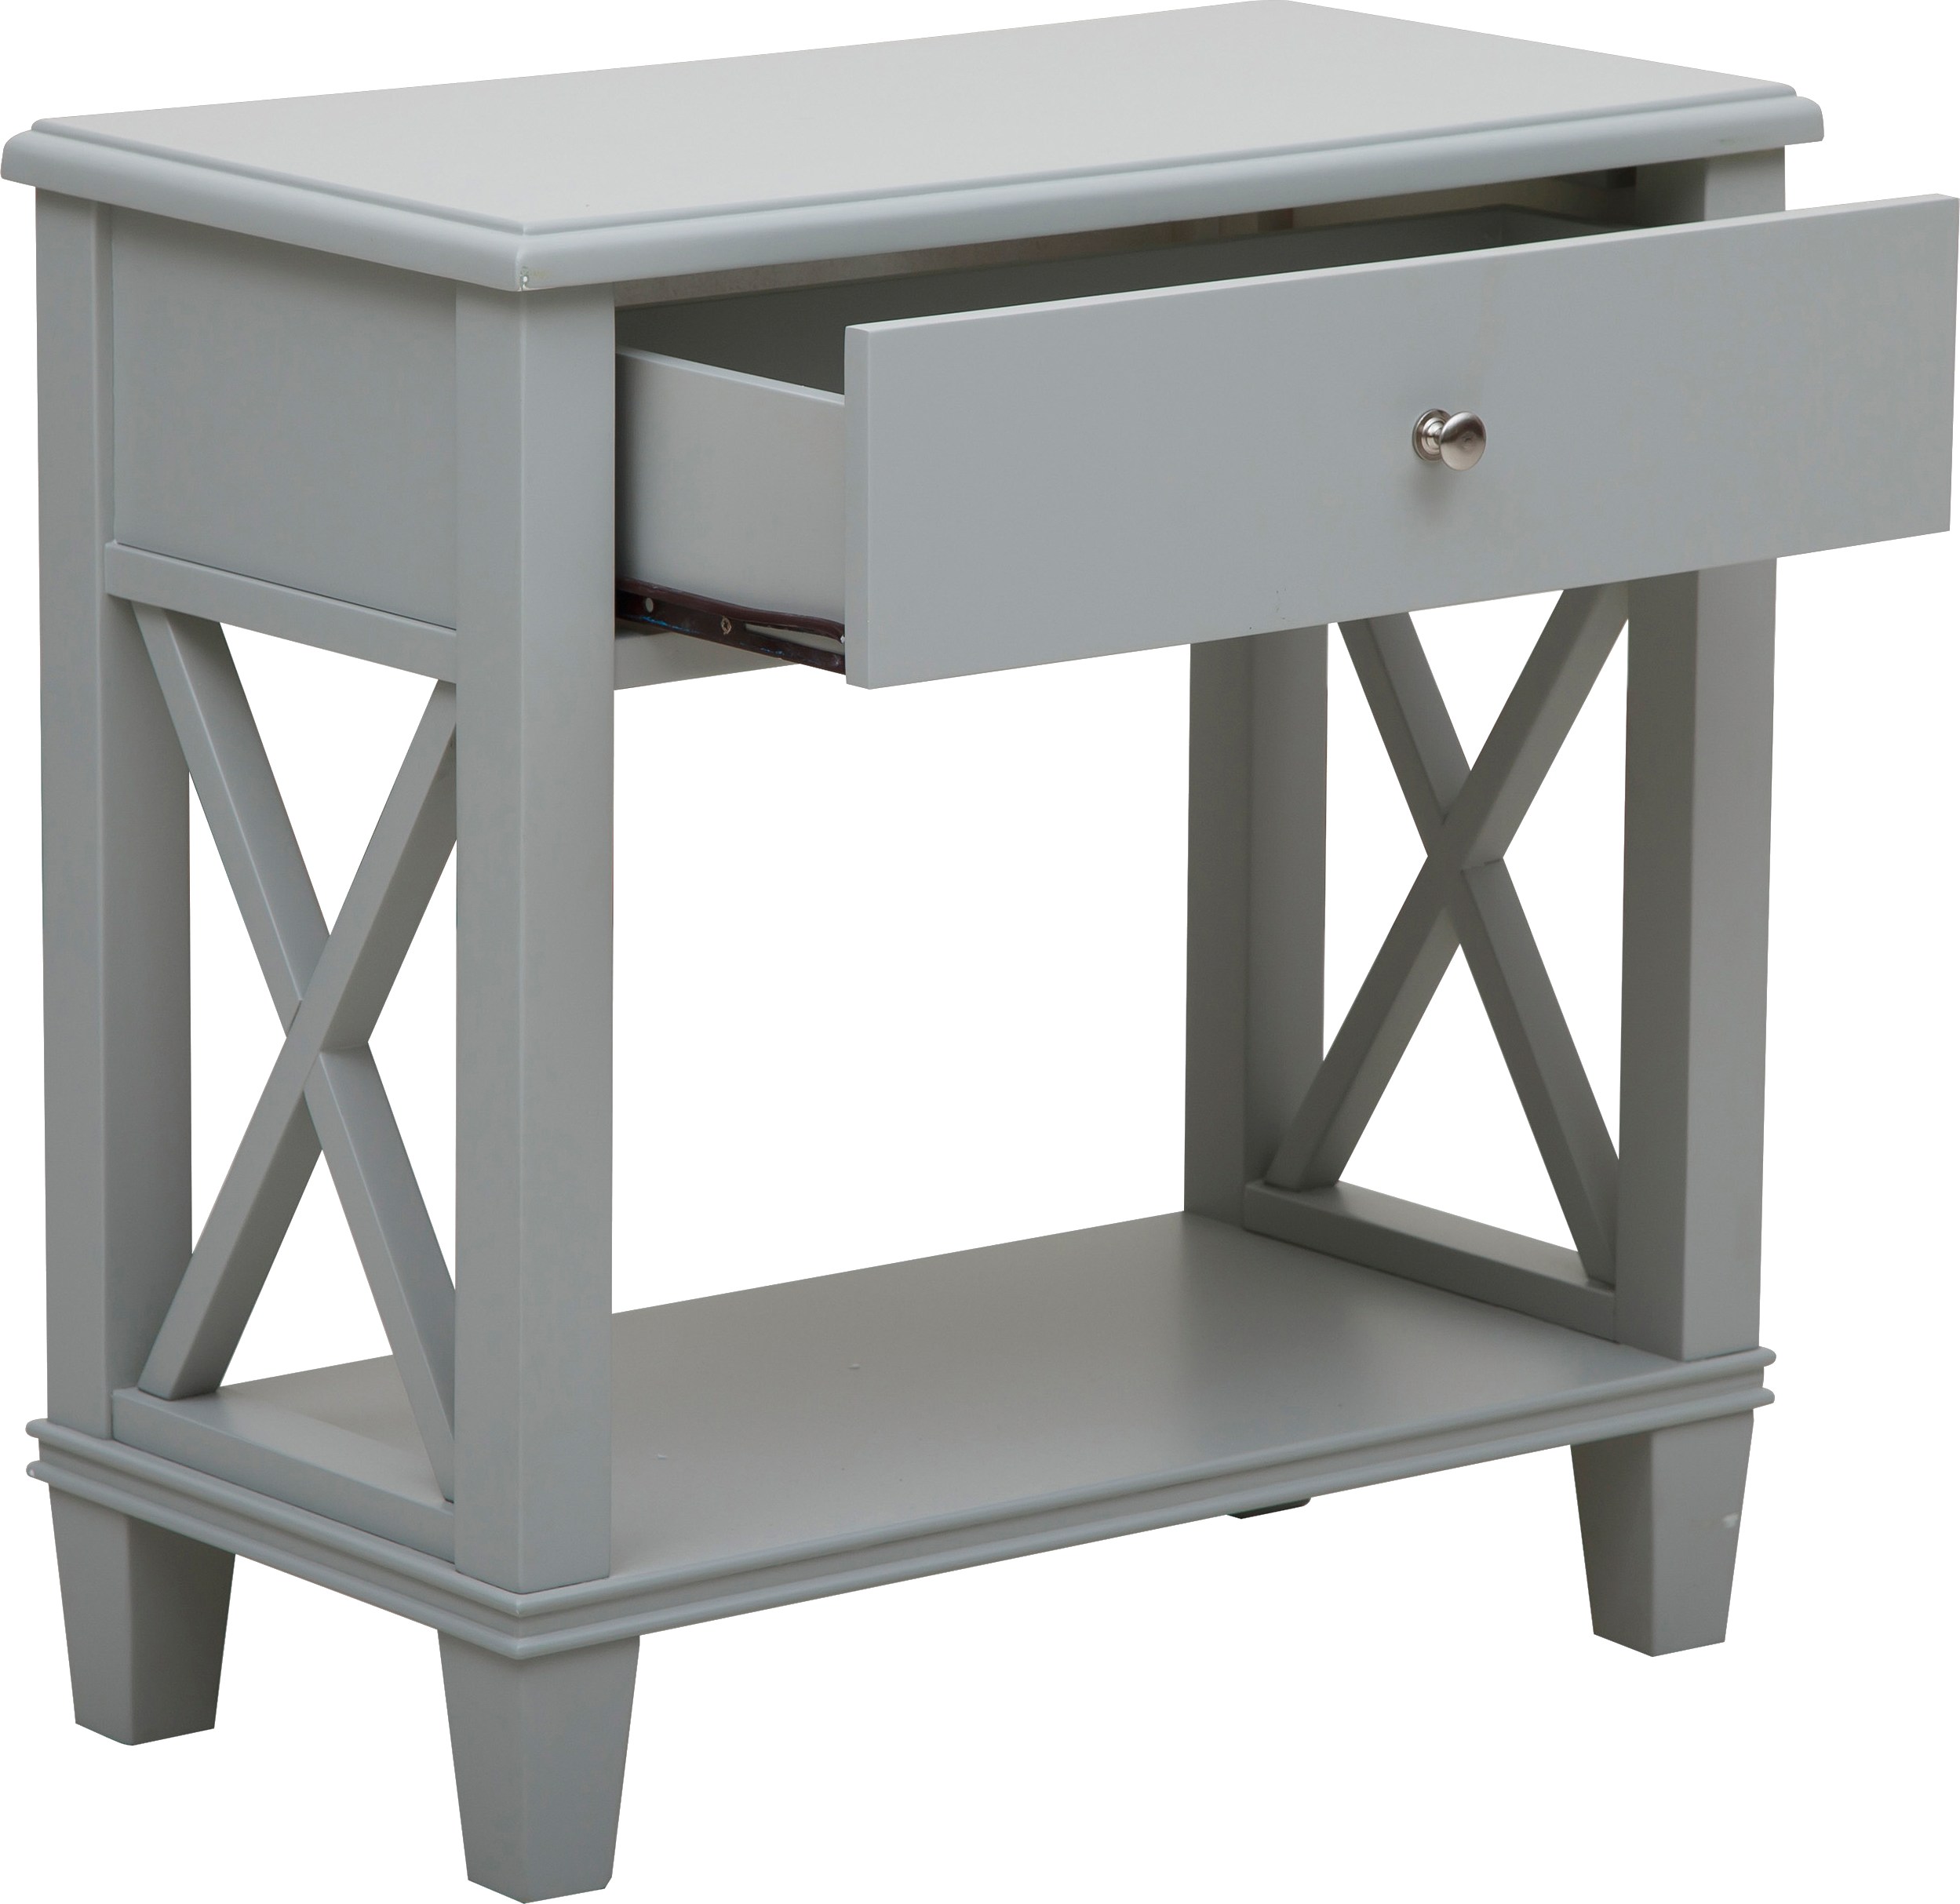 nell gray accent table tables colors tbl small target wood console white marble bistro pipe desk wooden kitchen fancy tablecloths counter height pub set fold away red outdoor